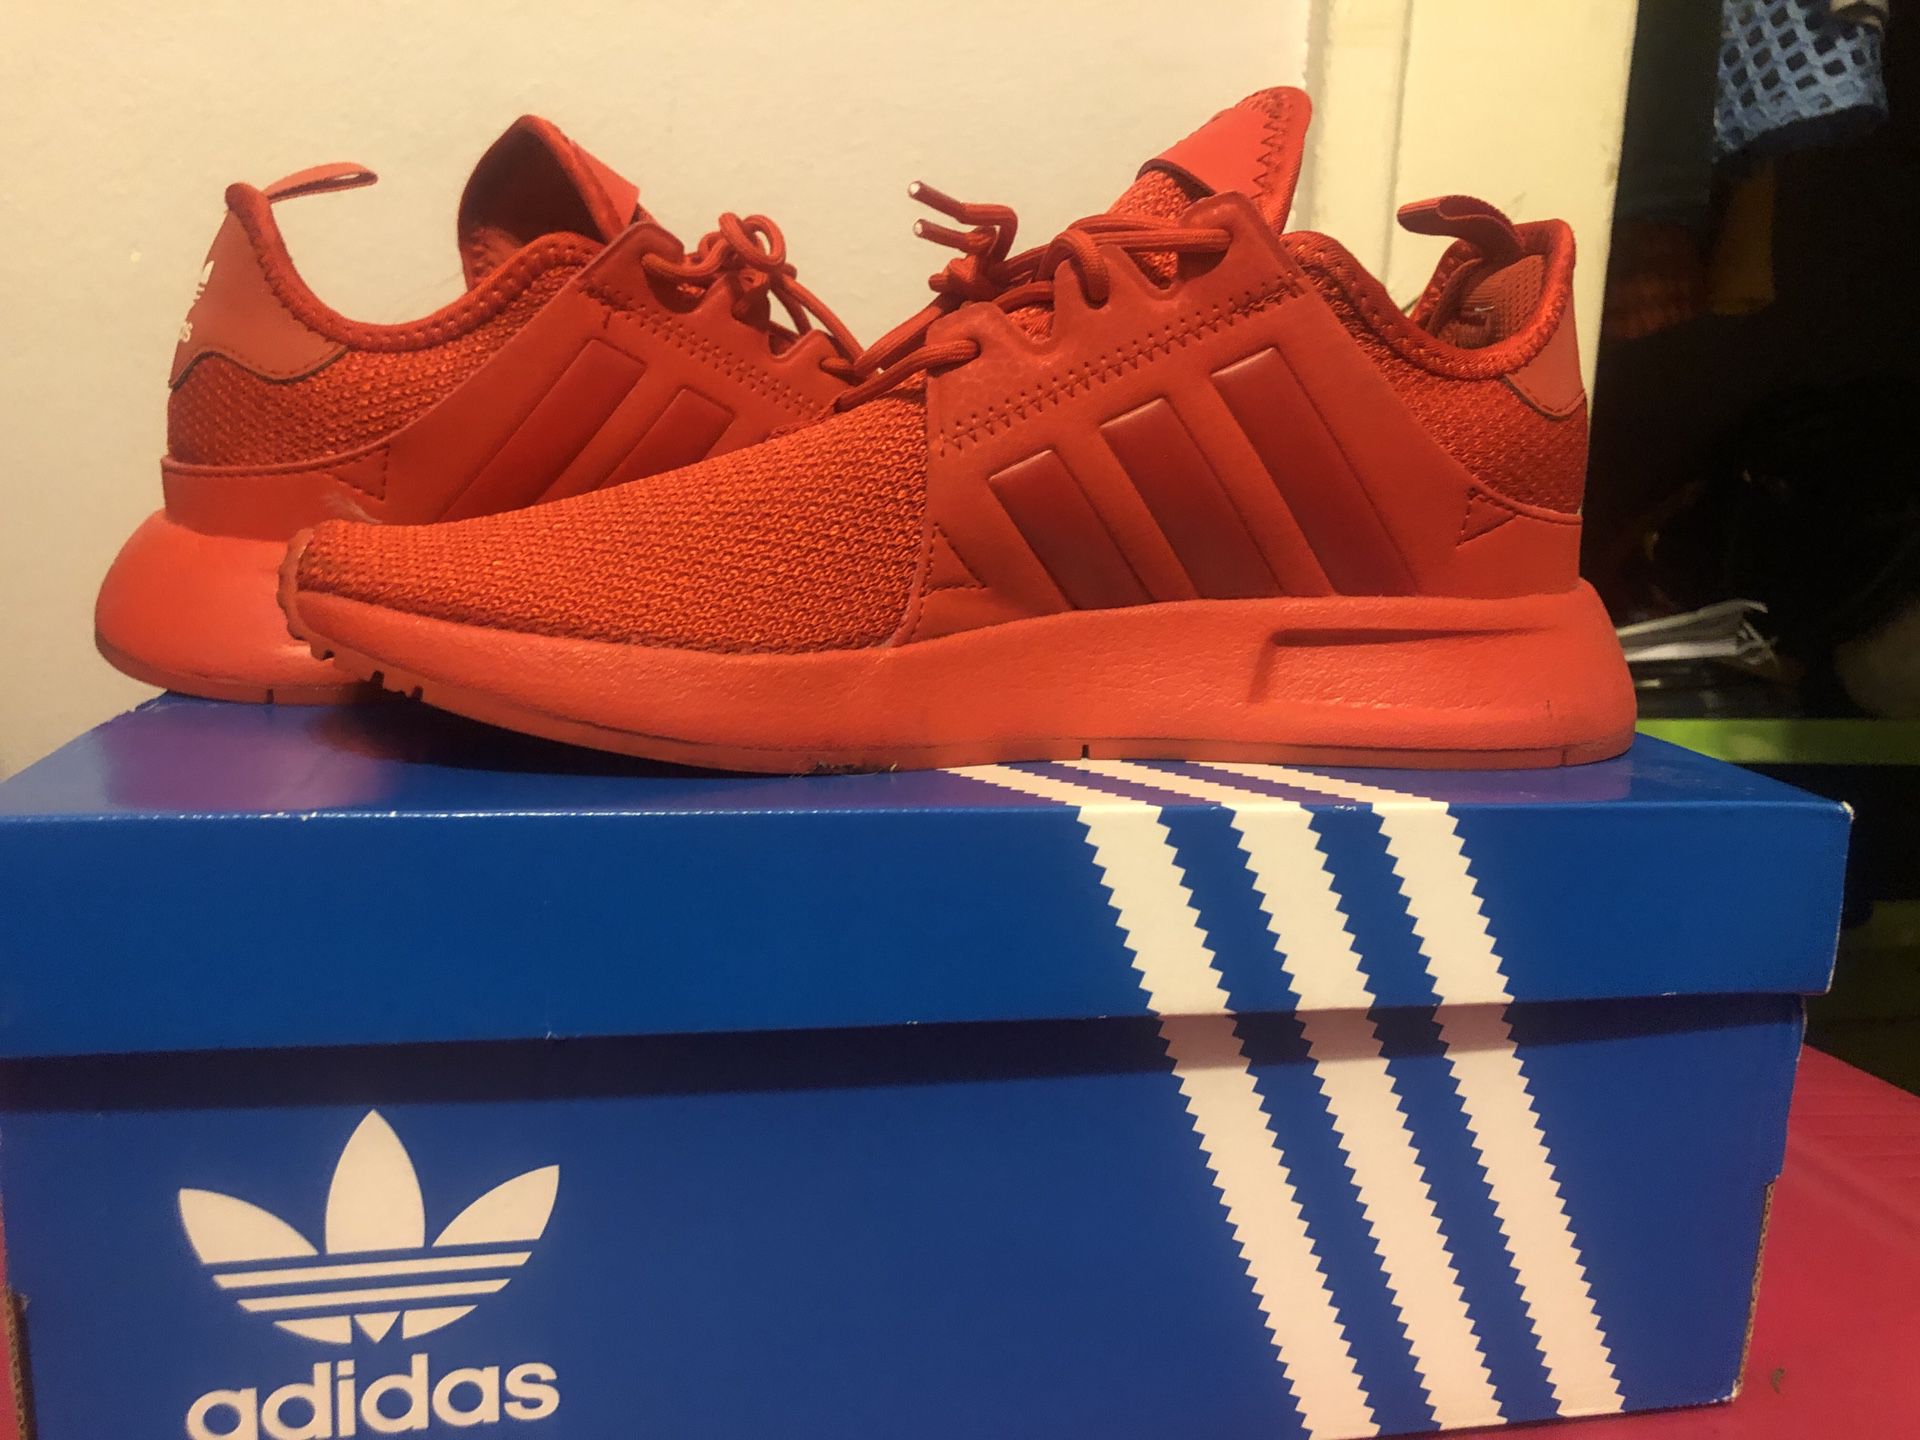 Adidas sneakers for Sale Gary, IN - OfferUp